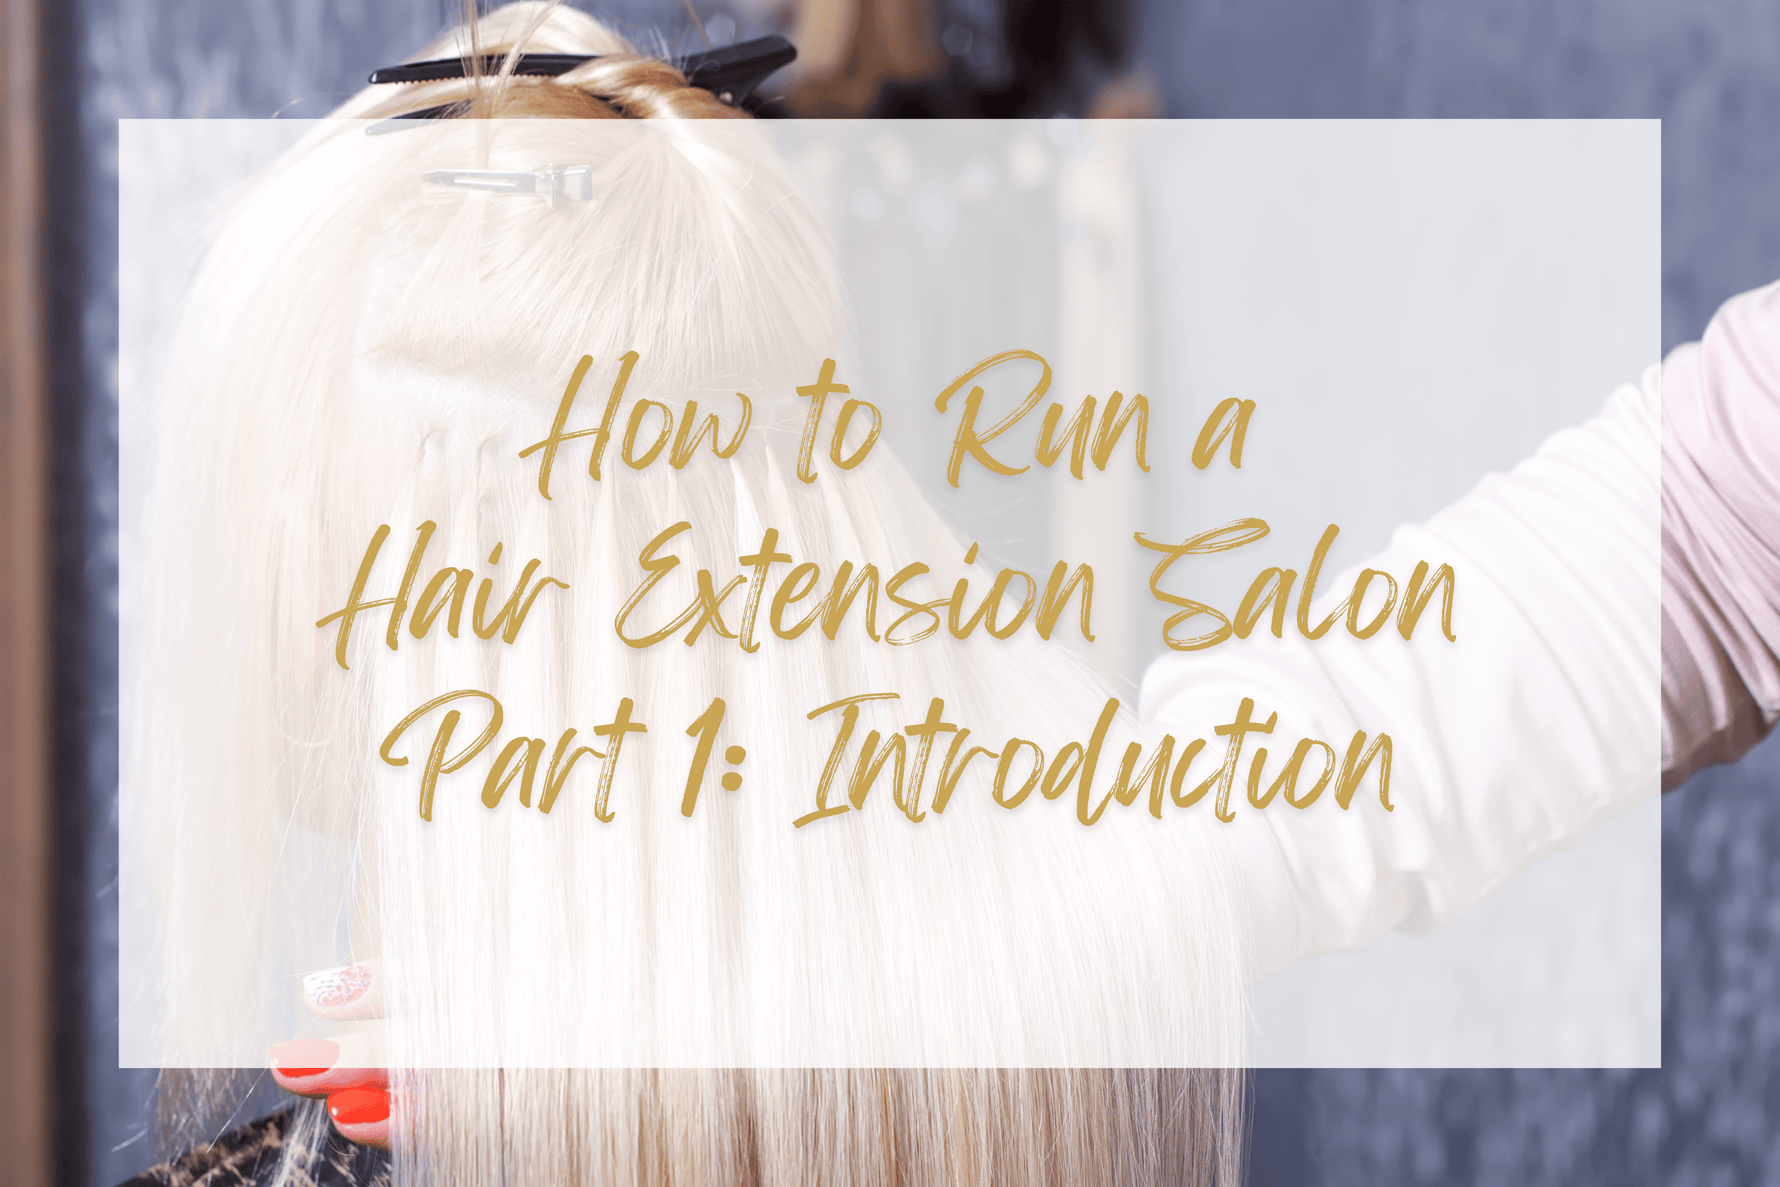 How to Run a Hair Extension Salon - Part 1: Introduction